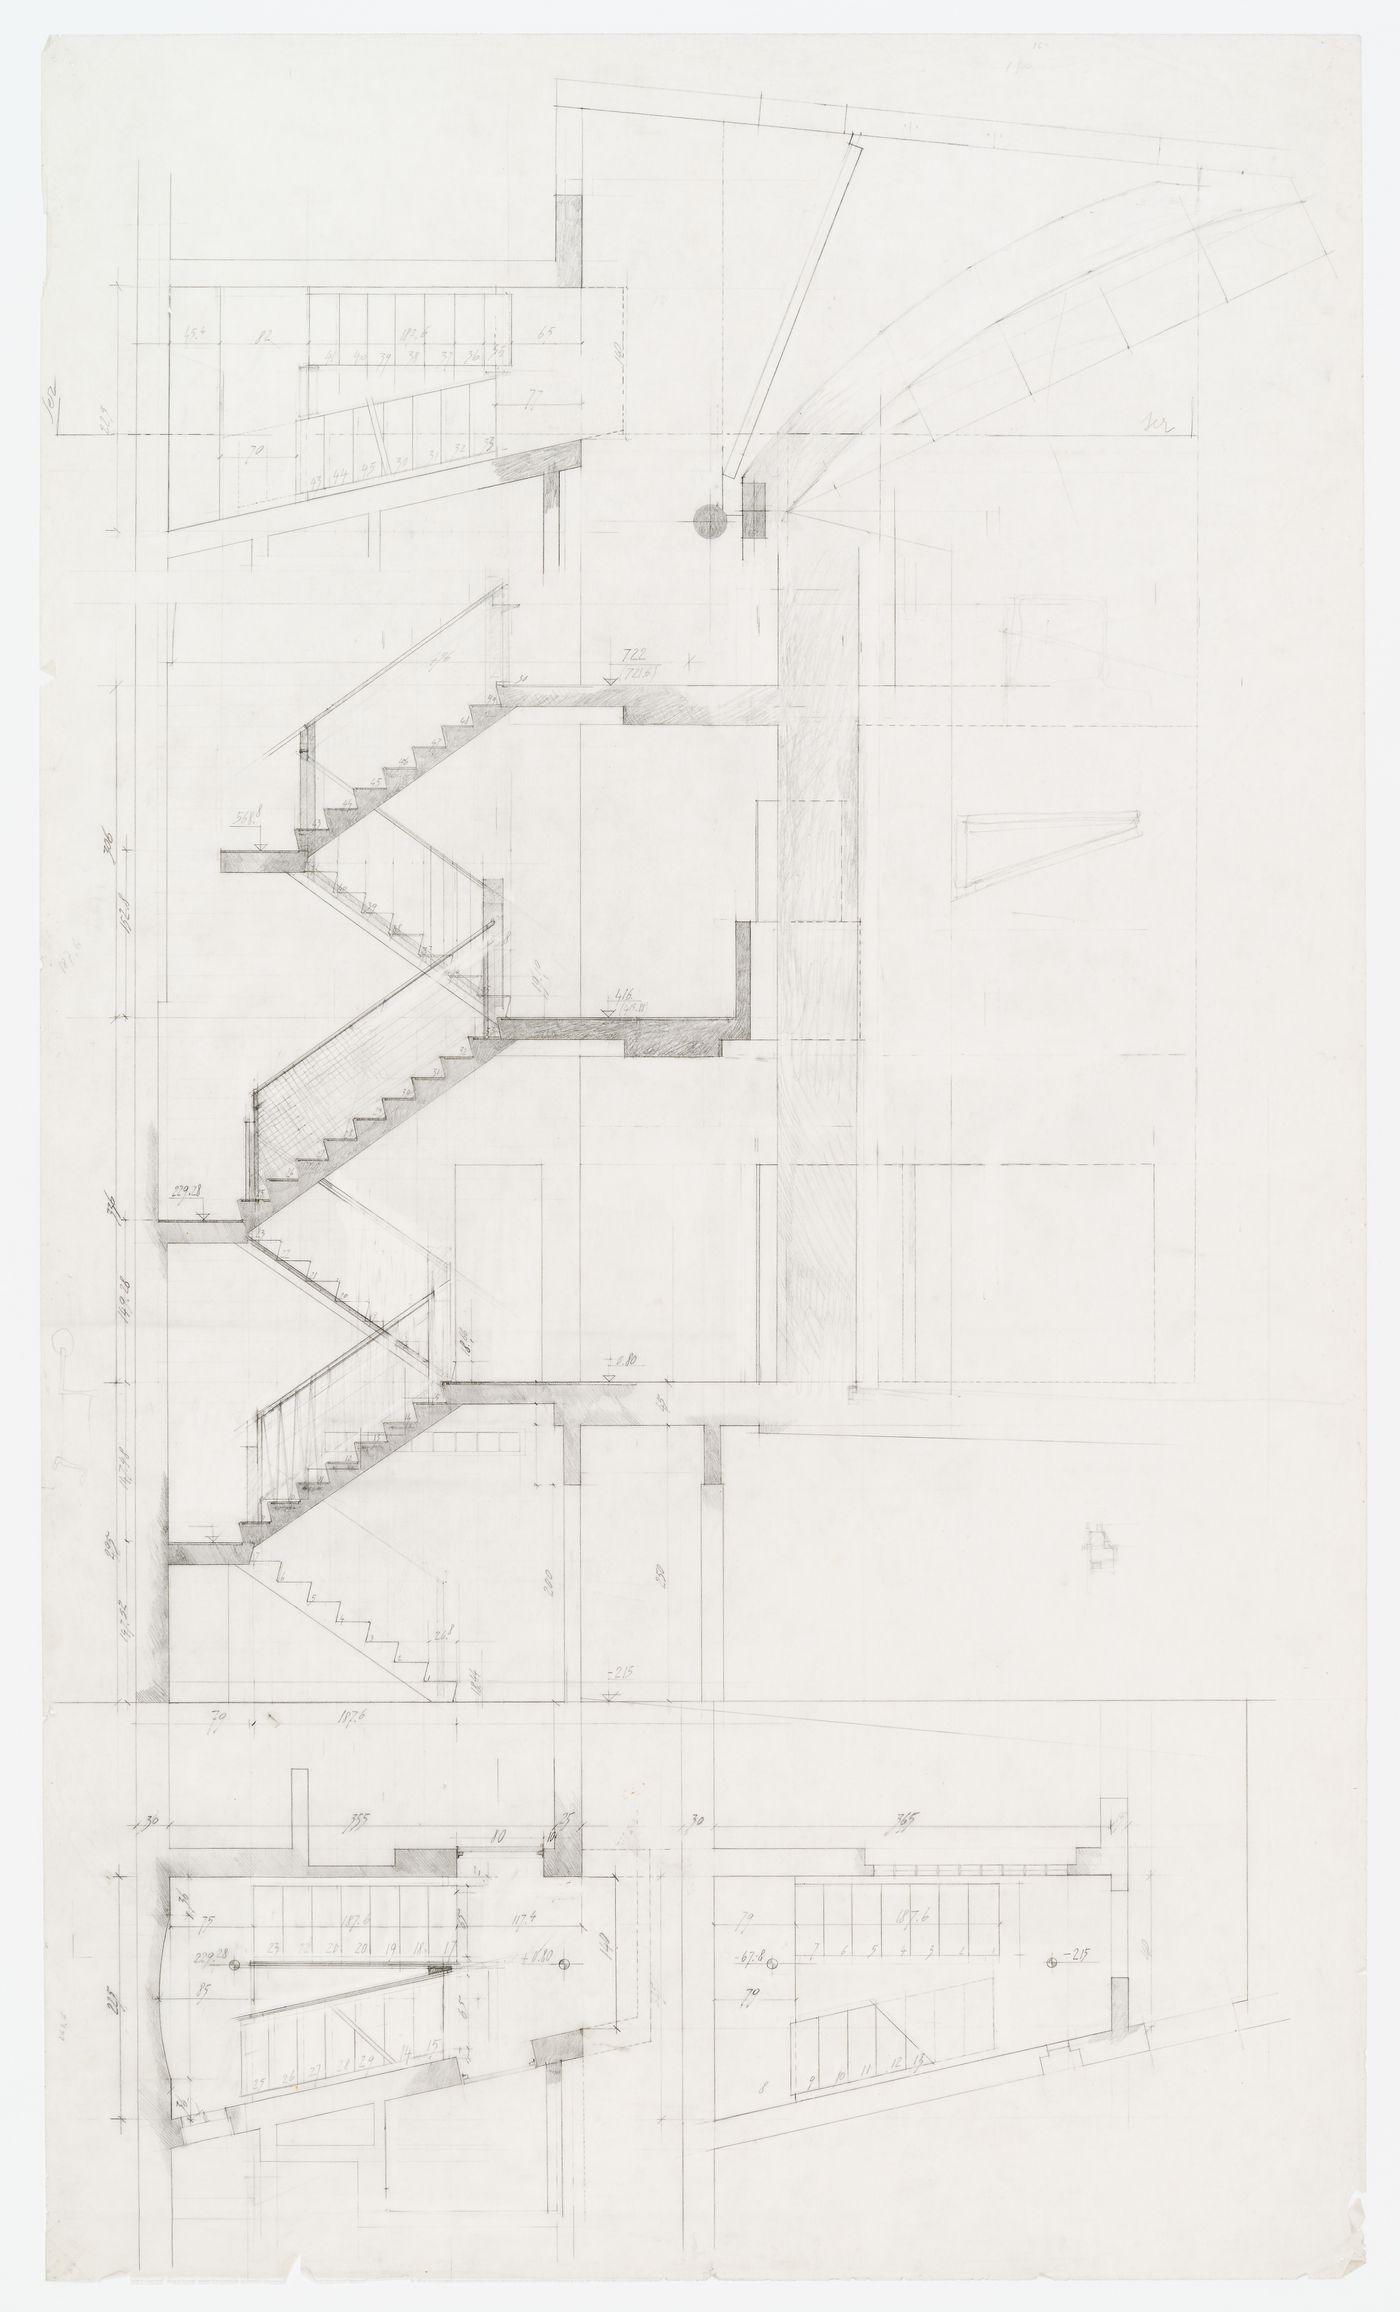 Section and plans of interior staircase for Casa Miggiano, Otranto, Italy